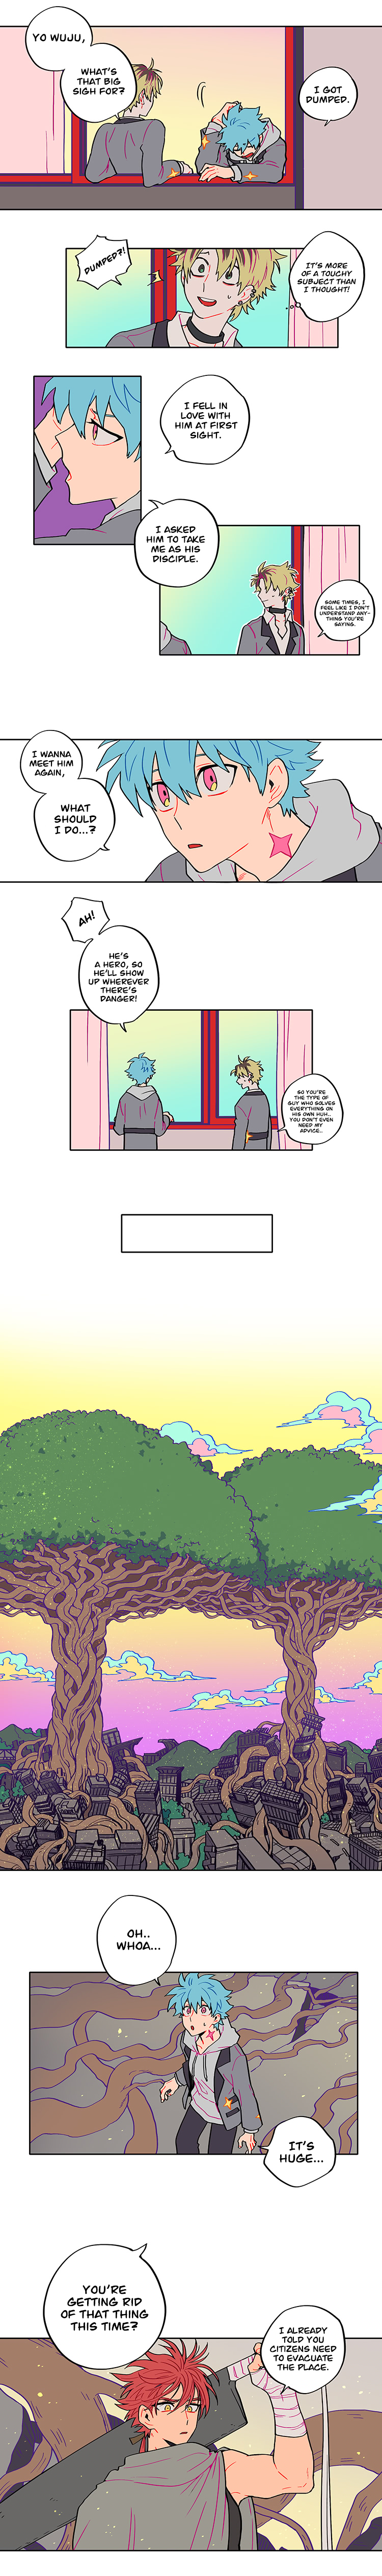 Universe And Sword - Page 2